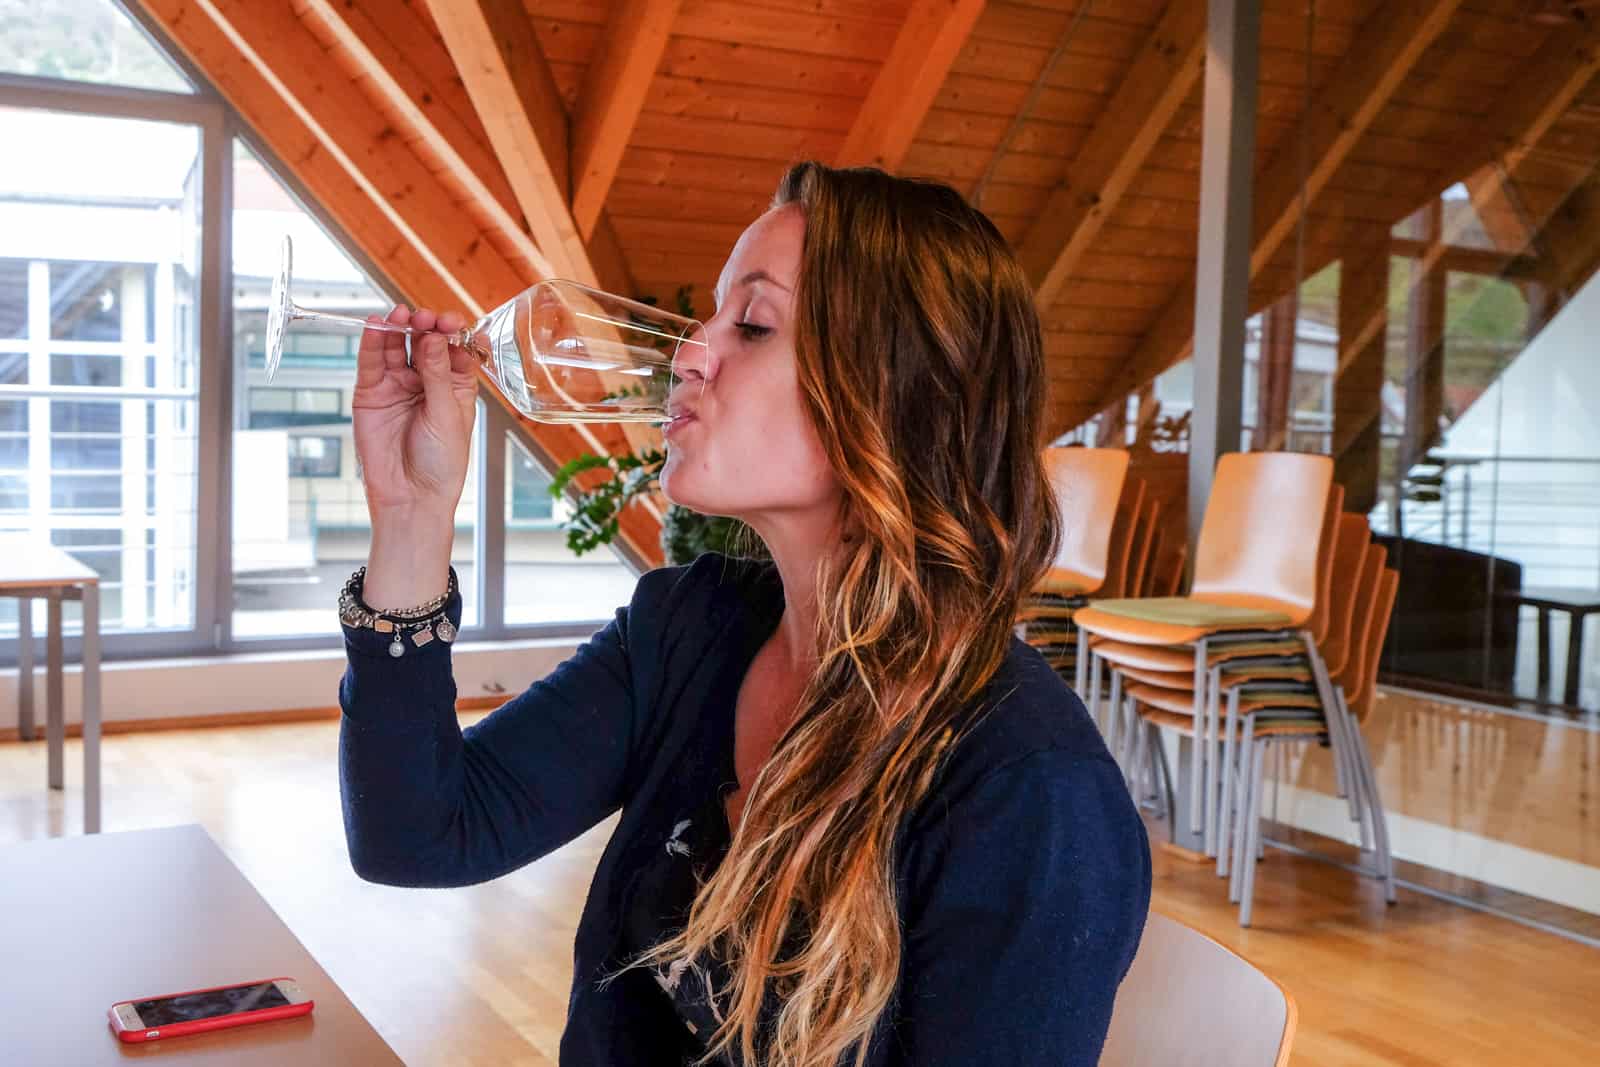 A woman wine tasting a white wine at the Domäne Wachau winery in a modern wooden decor building